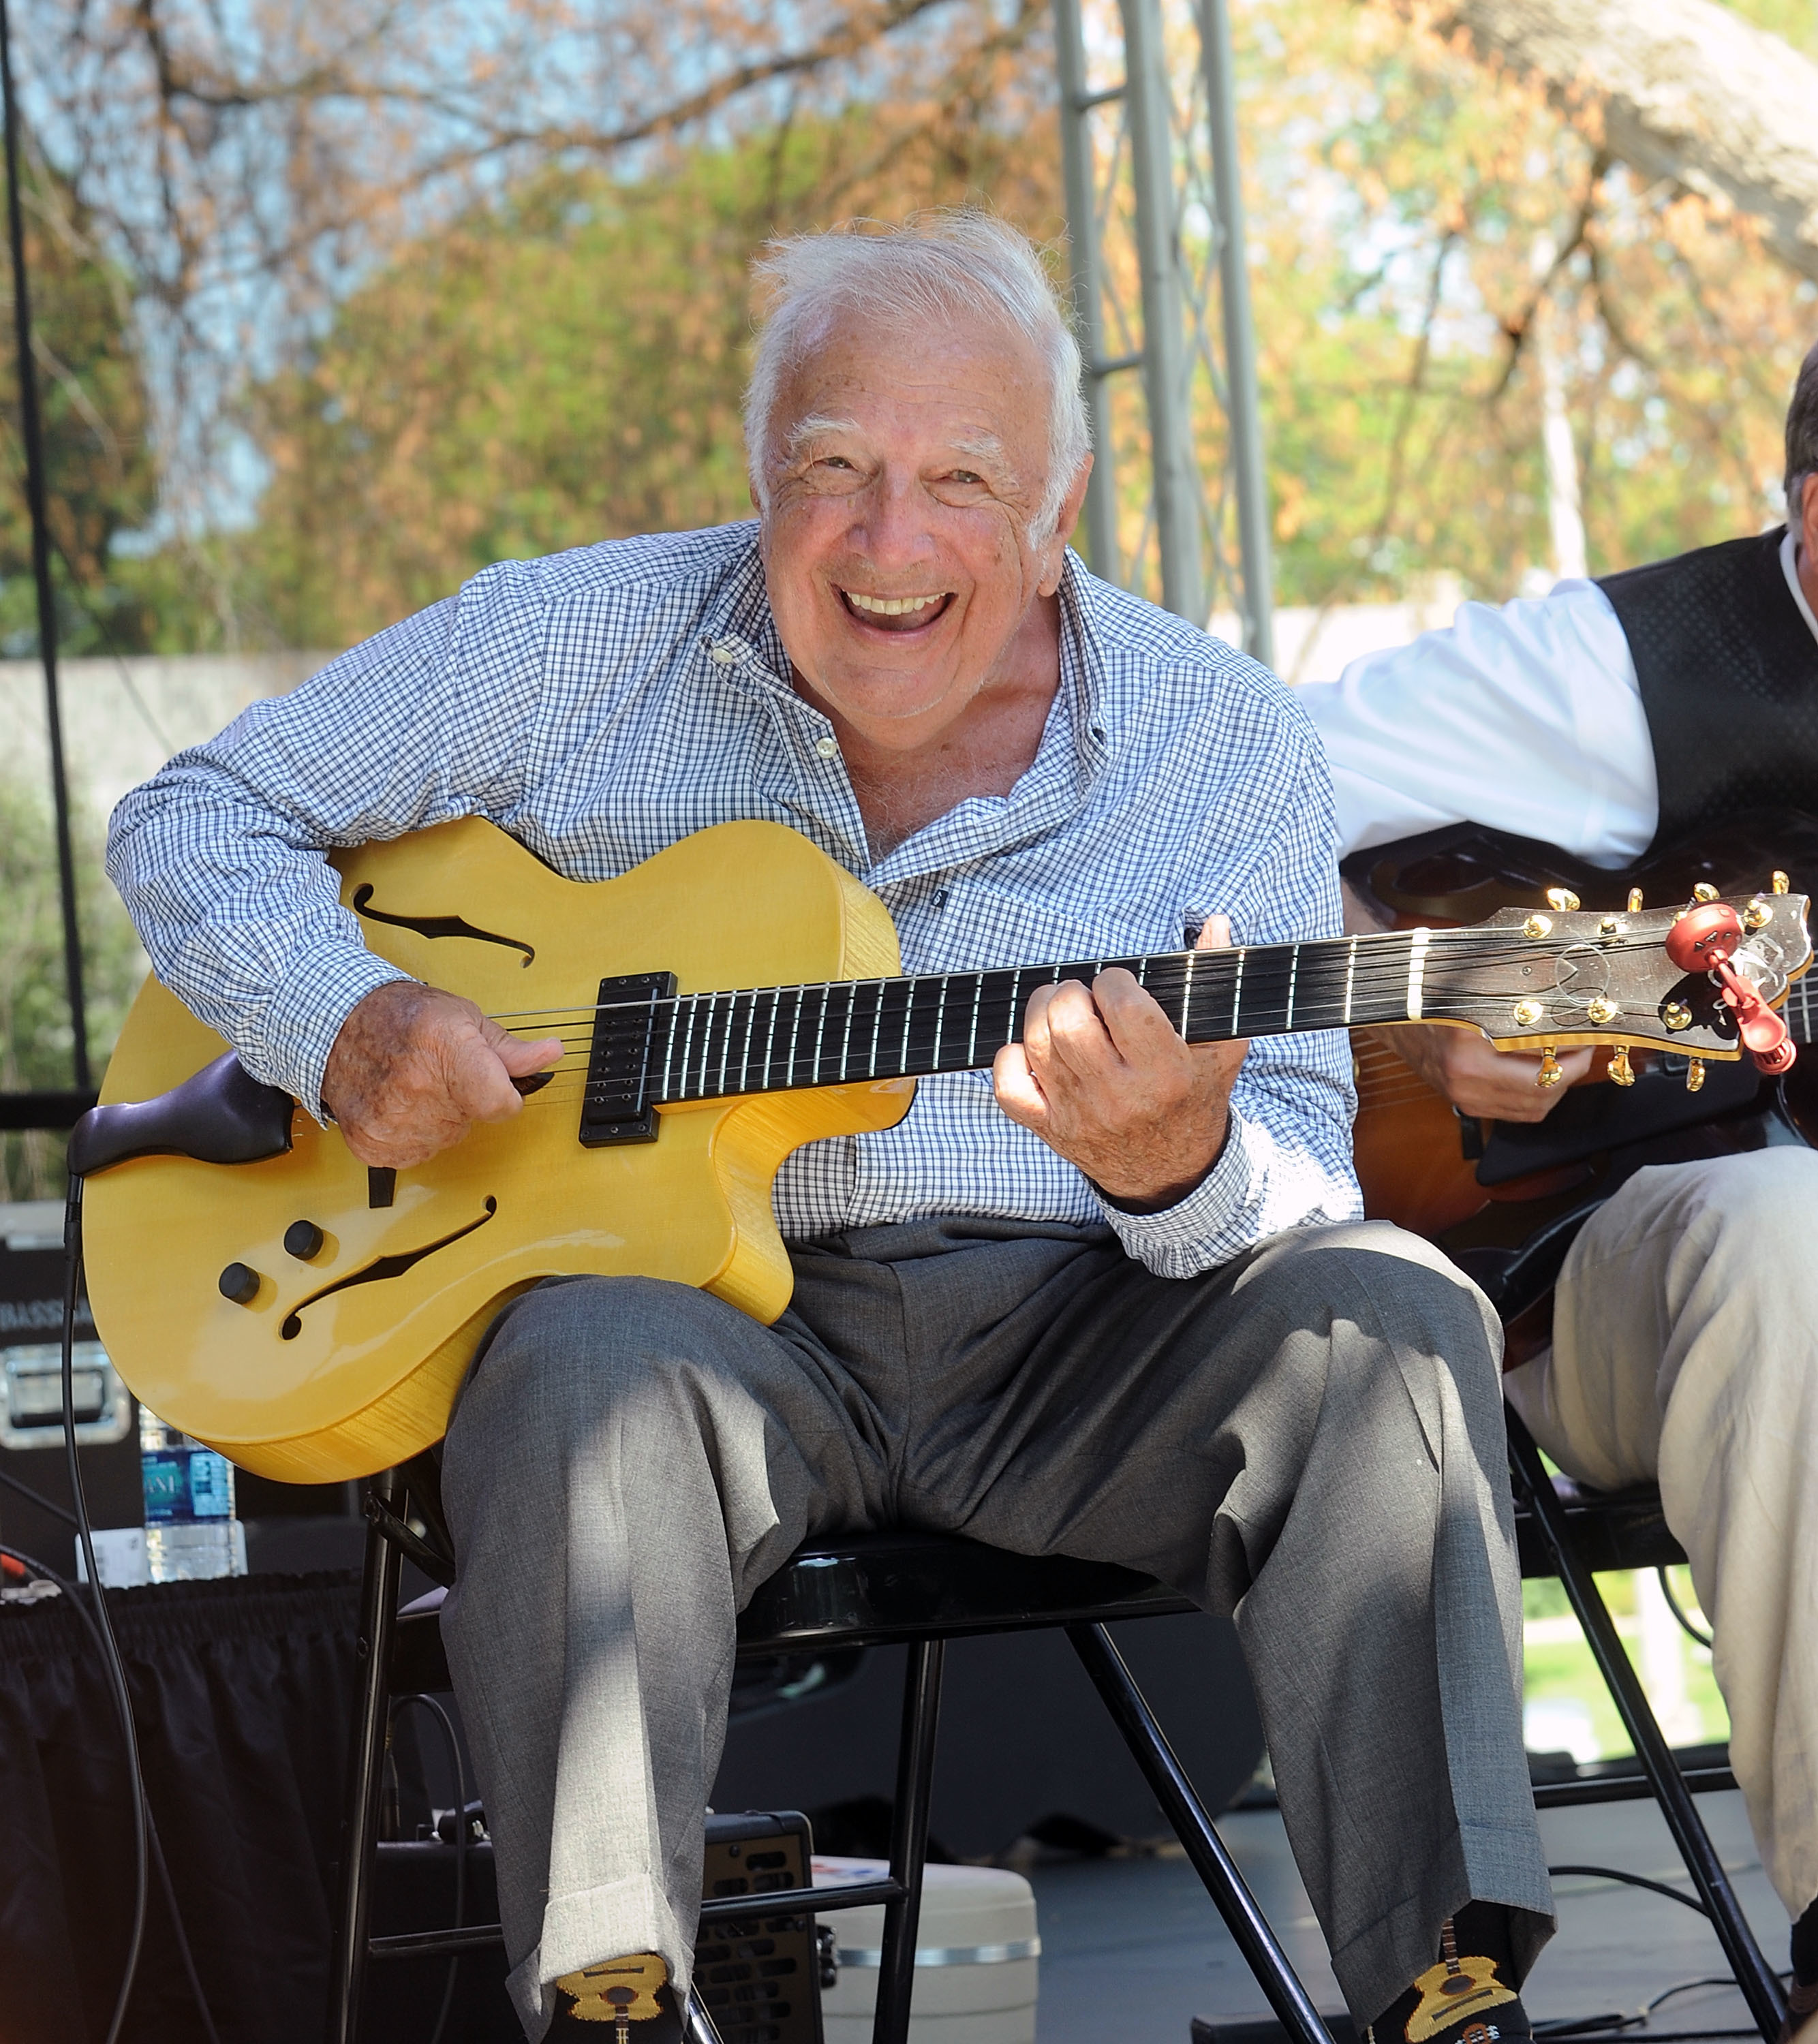 <p>Jazz guitarist John "Bucky" Pizzarelli, 94, died on April 1 from COVID-19 at his New Jersey home. Bucky -- the father of noted musicians John Pizzarelli and Martin Pizzarelli -- collaborated with artists including Benny Goodman, Antônio Carlos Jobim and Stéphane Grappelli during his lengthy career. He was also a staff musician in The Tonight Show Band on "The Tonight Show Starring Johnny Carson" in 1964.</p>